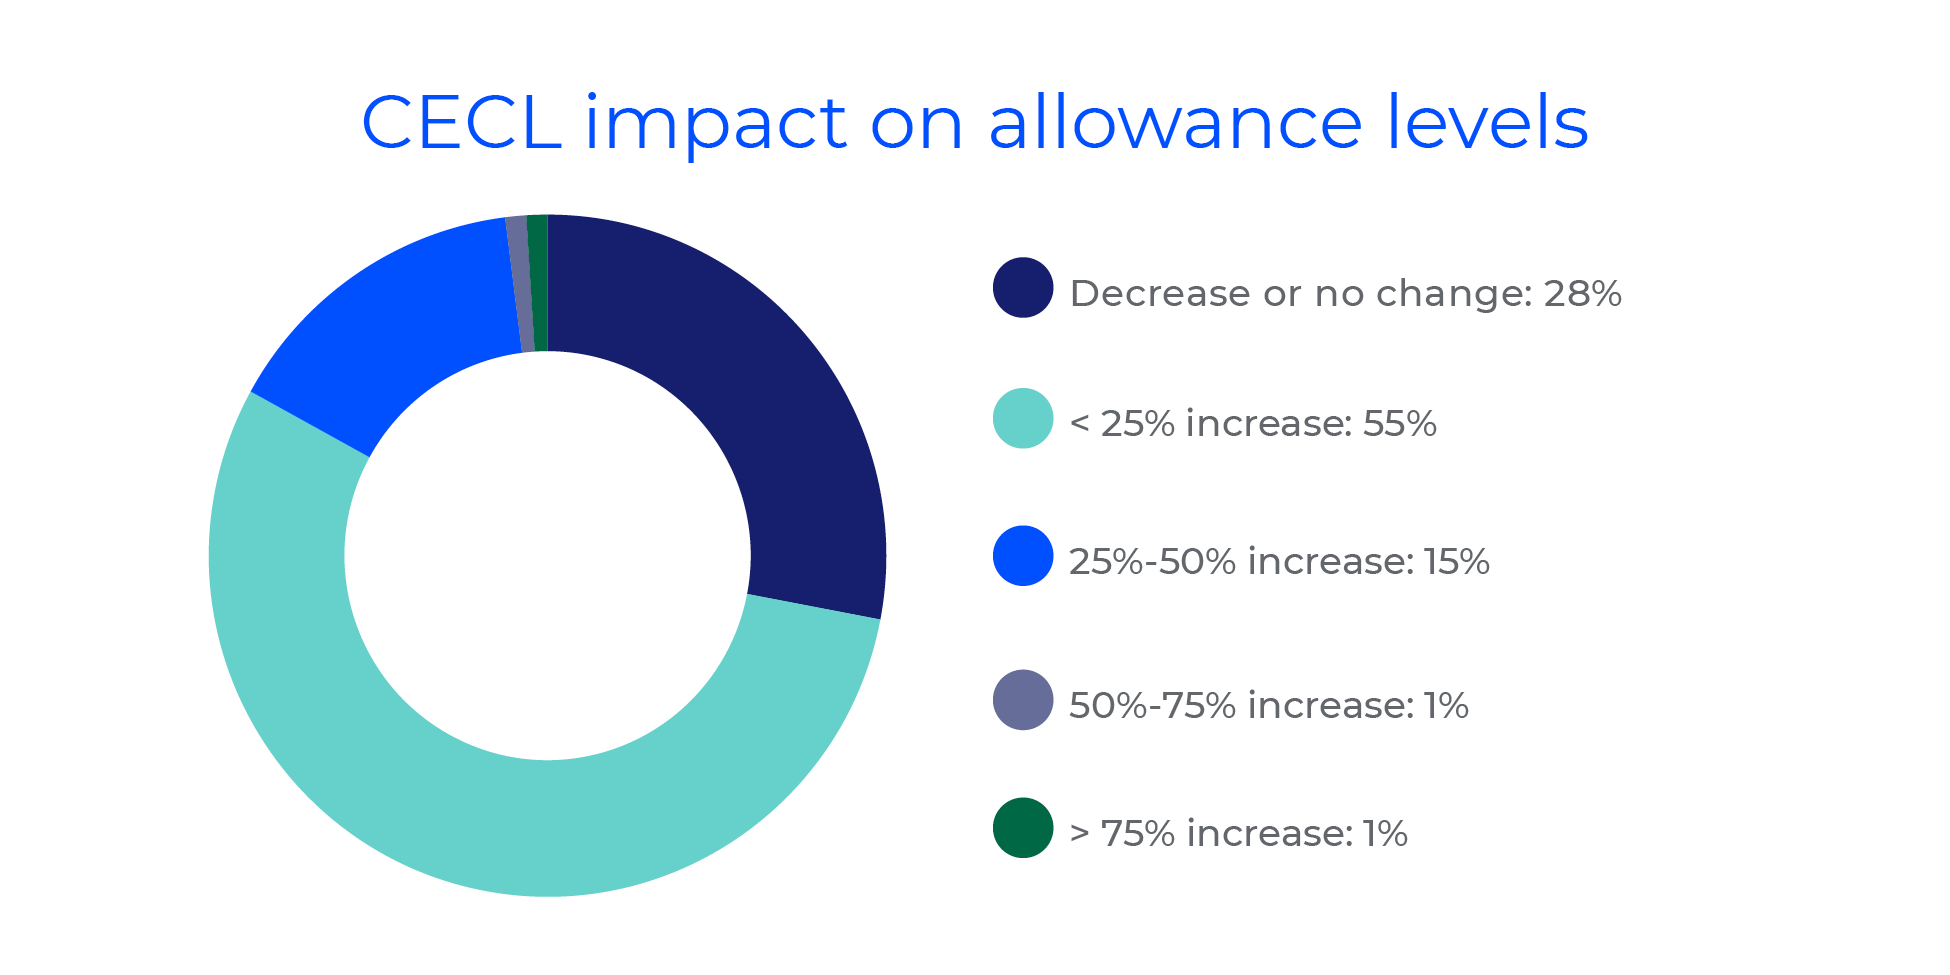 CECL impact on allowance levels